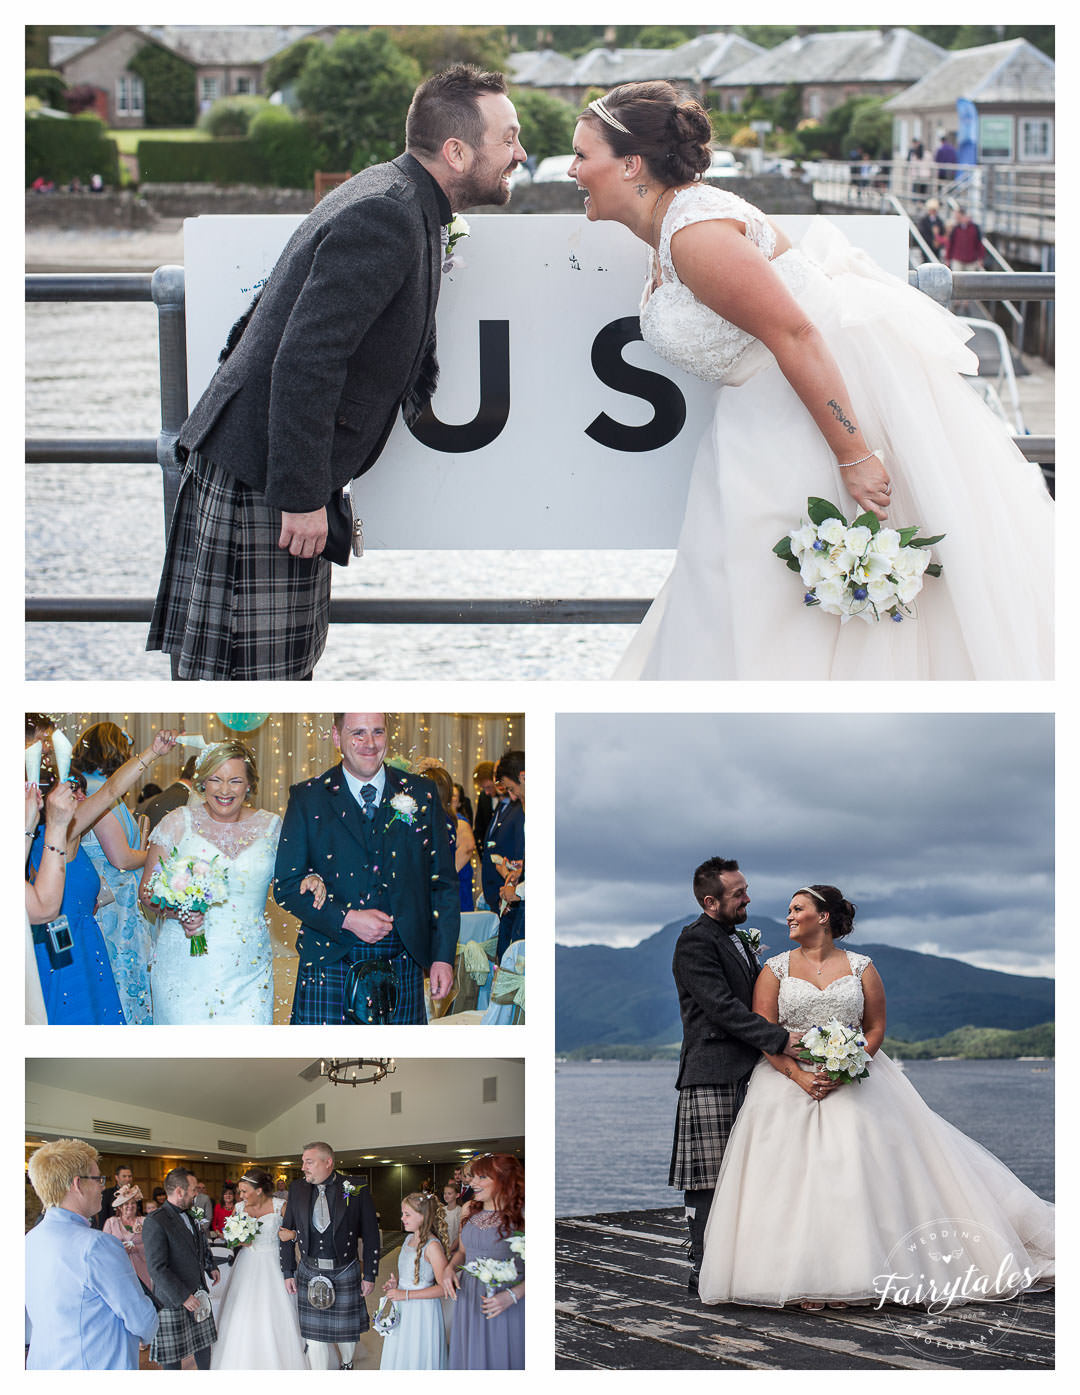 Bride and groom on luss Standing next to Luss loch lomond sign